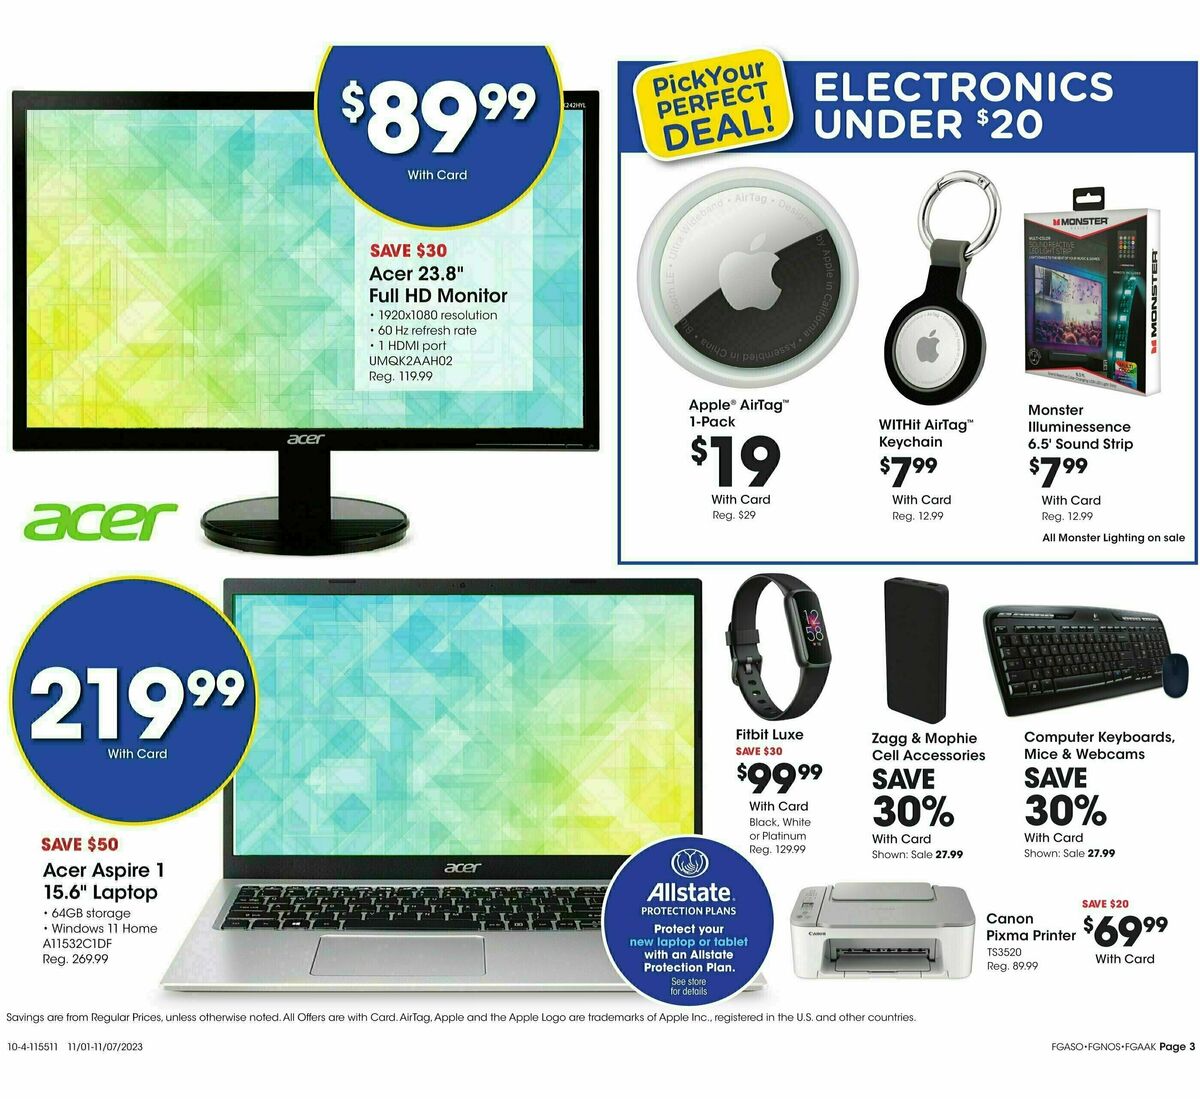 Fred Meyer General Merchandise Weekly Ad from November 1